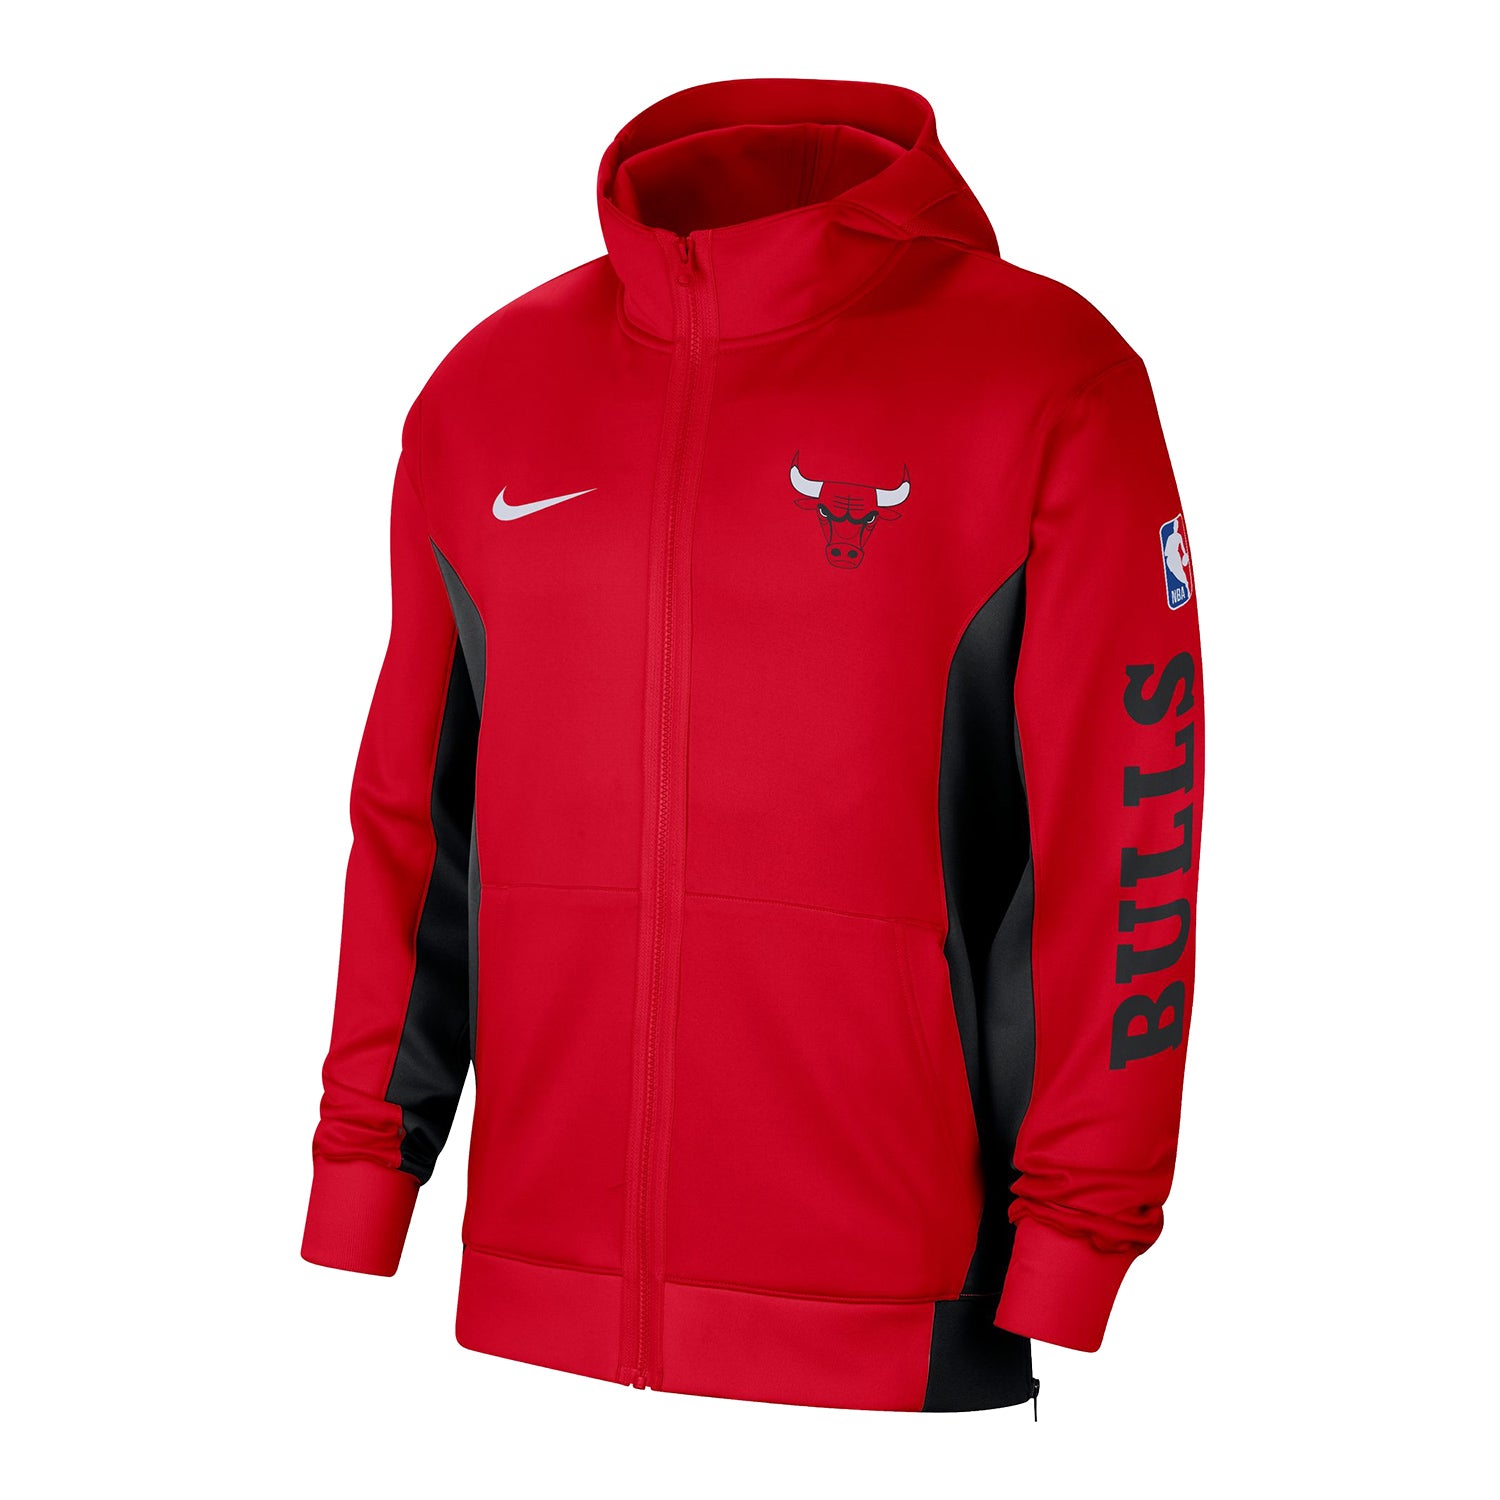 Chicago Bulls Nike Showtime Jacket - red and black - front view